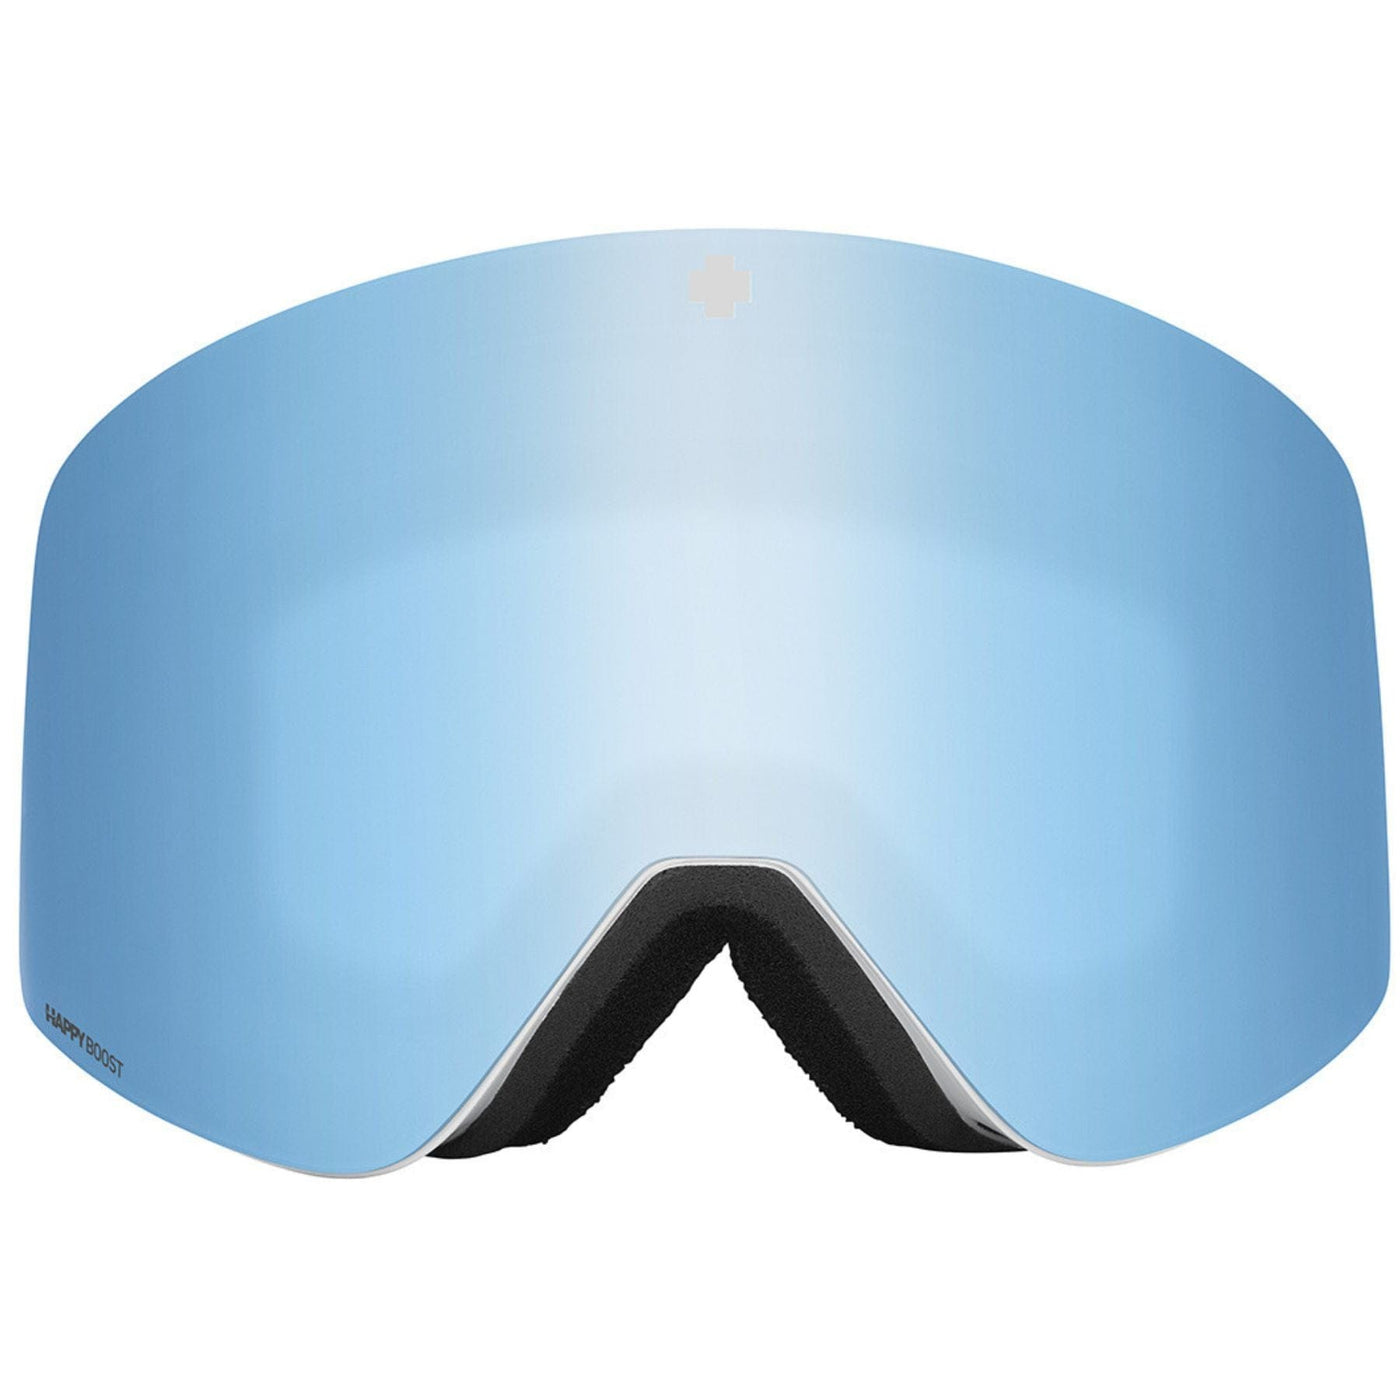 SPY Marauder Elite White Snow Goggles - Happy Boost Lens 8Lines Shop - Fast Shipping